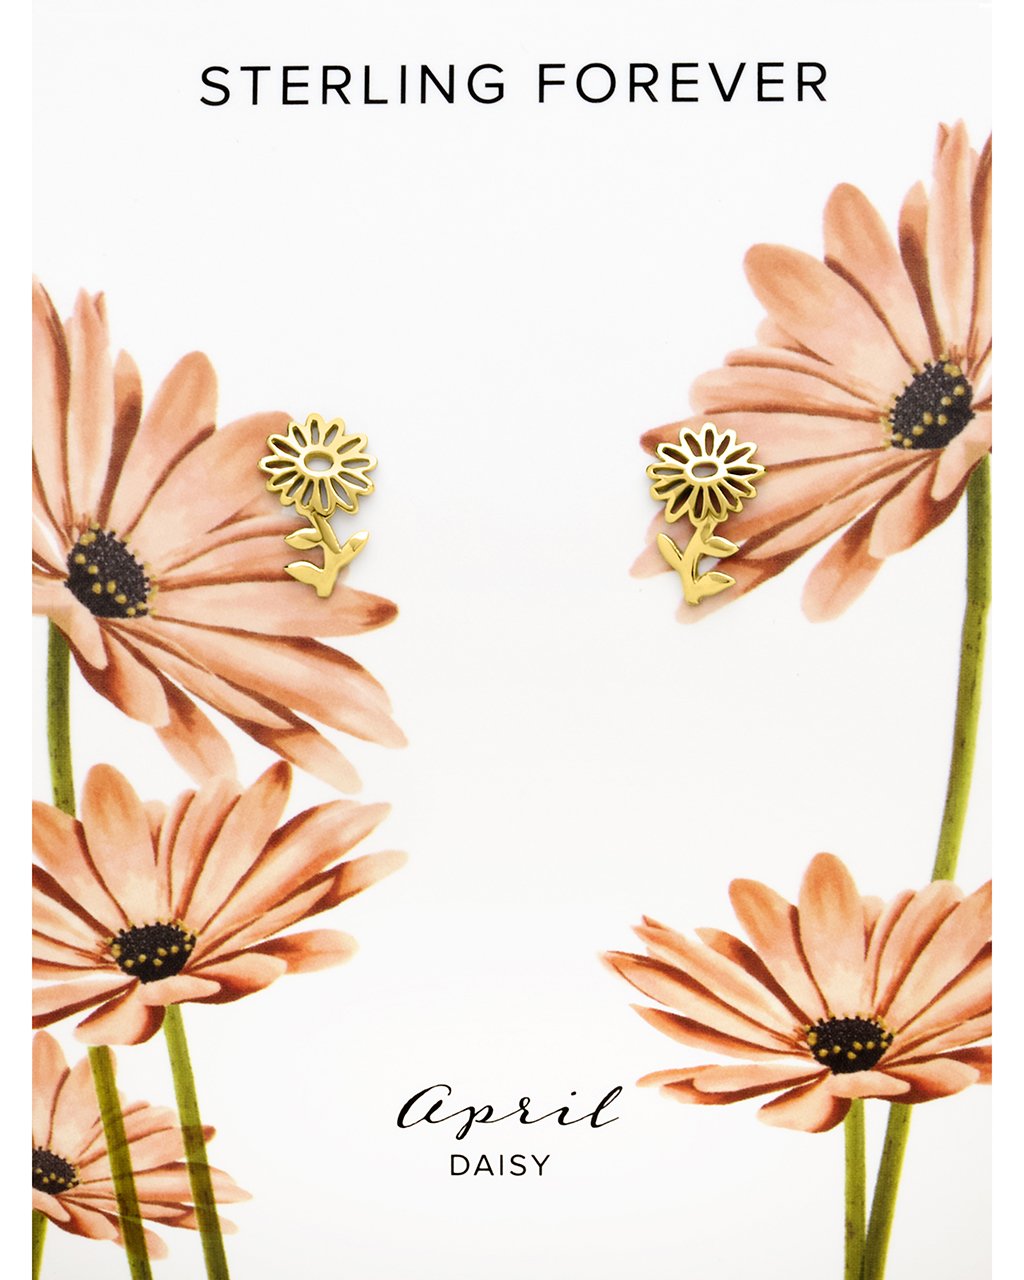 Sterling Silver Birth Flower Studs Earring Sterling Forever Gold April / Daisy 